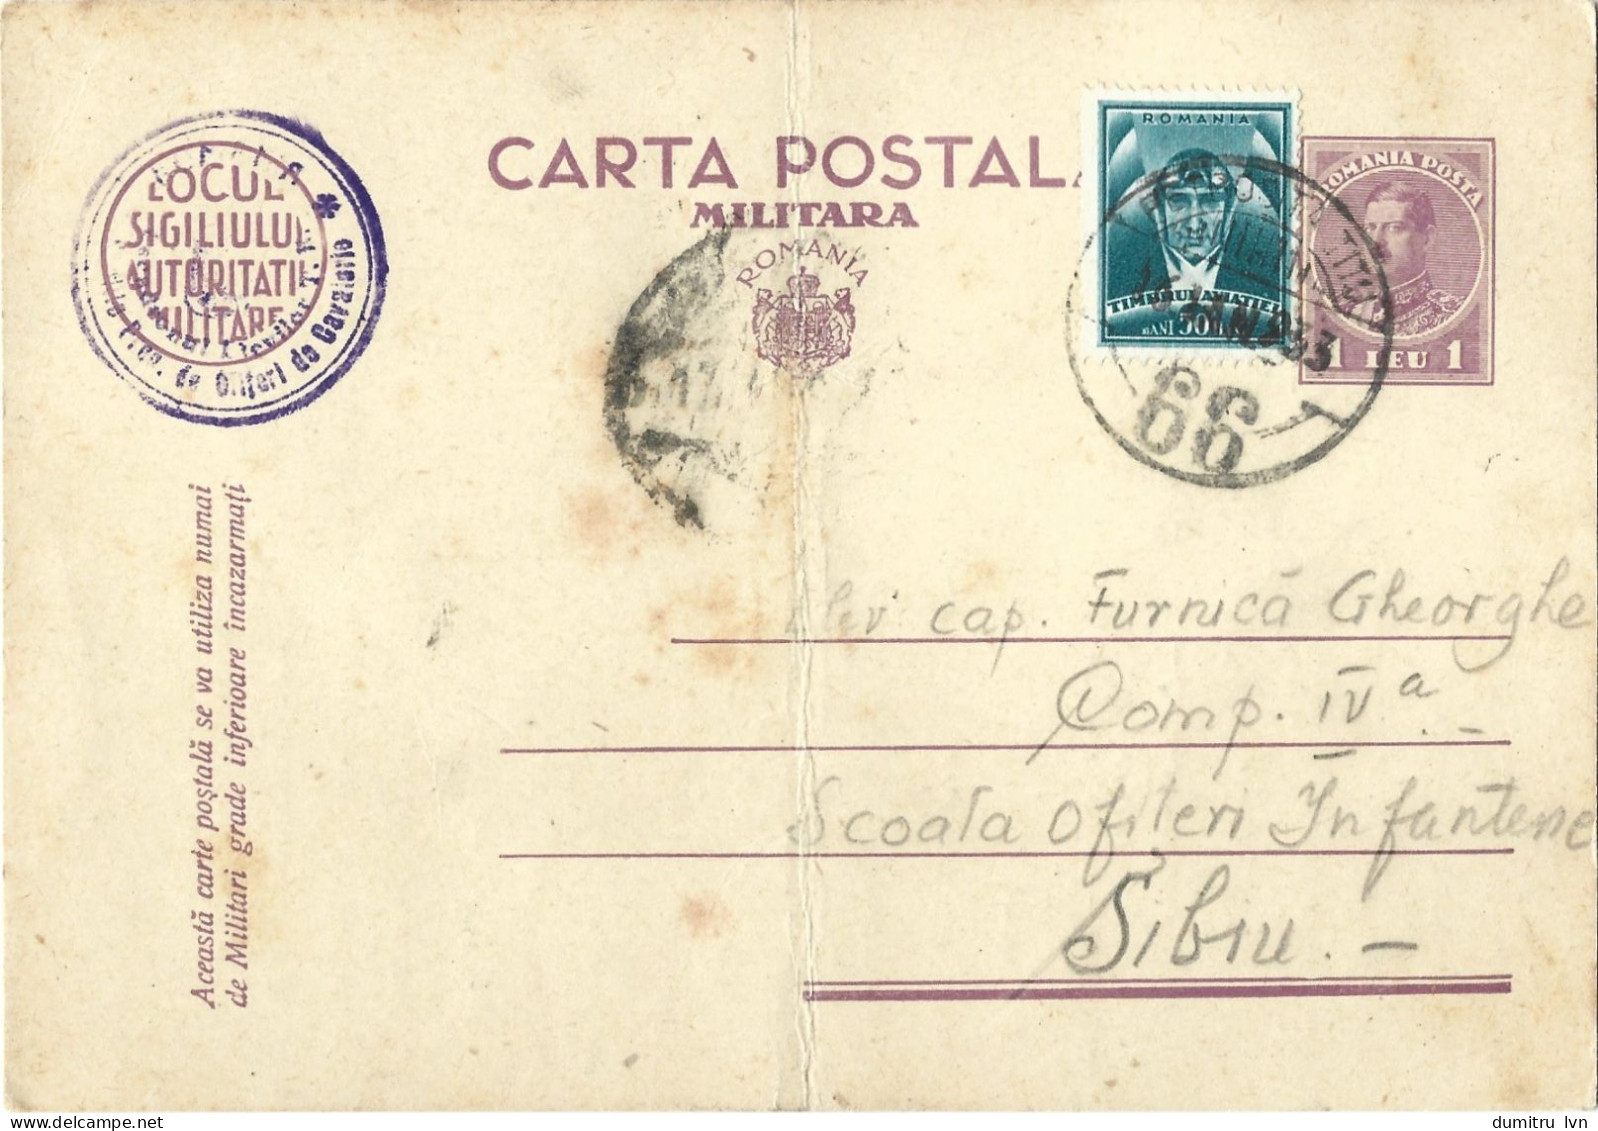 ROMANIA 1933 MILITARY, CENSORED,  POSTCARD STATIONERY - World War 2 Letters